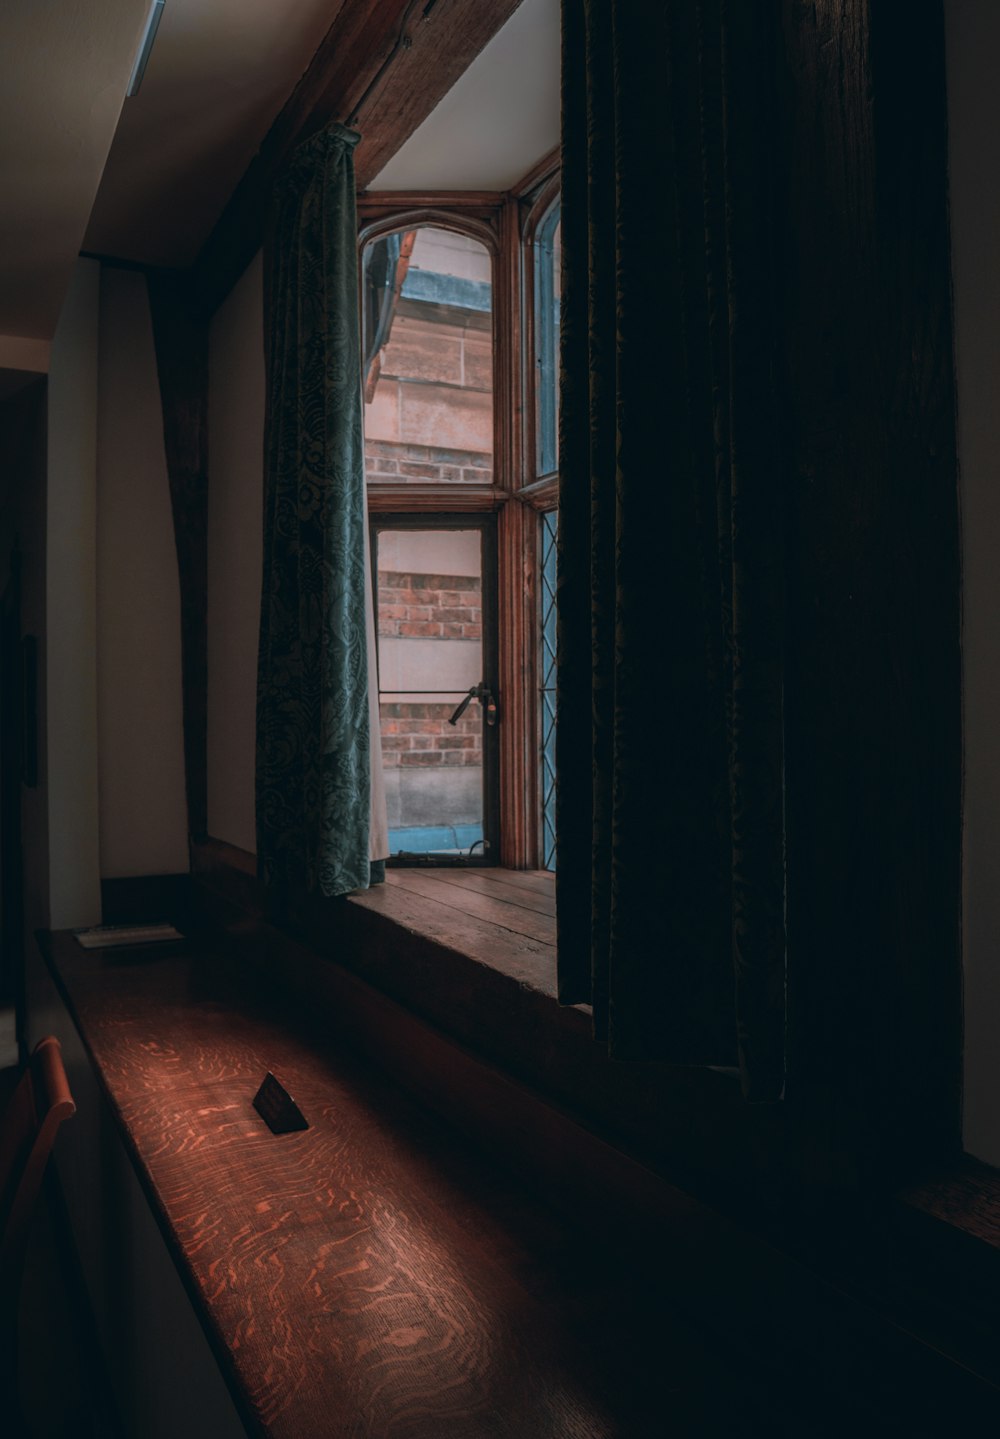 a window in a room with a wooden counter